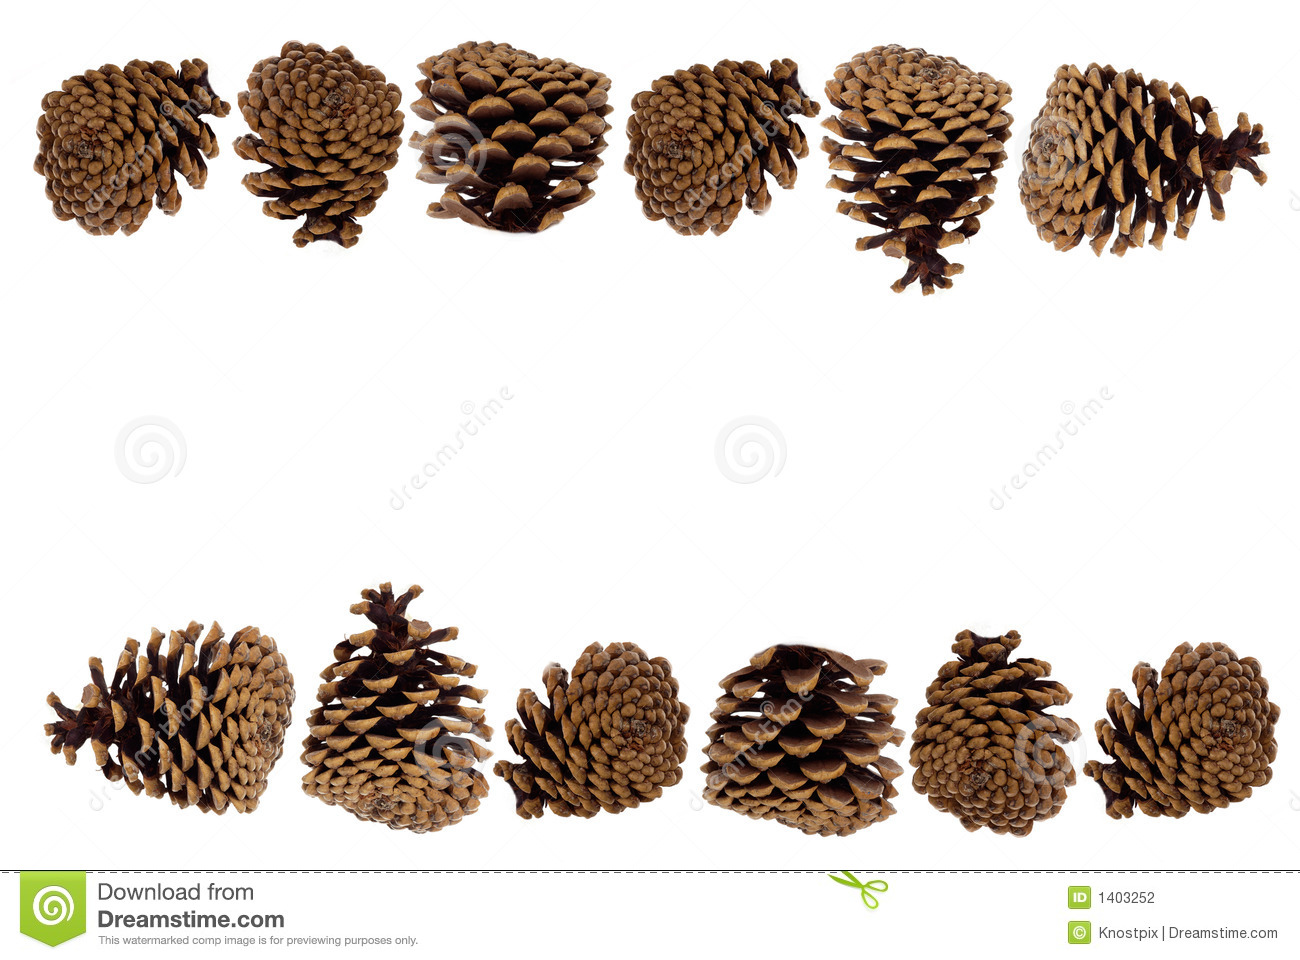 This Stock Photo Is A Decorative Border Of Pine Cones On Plain White